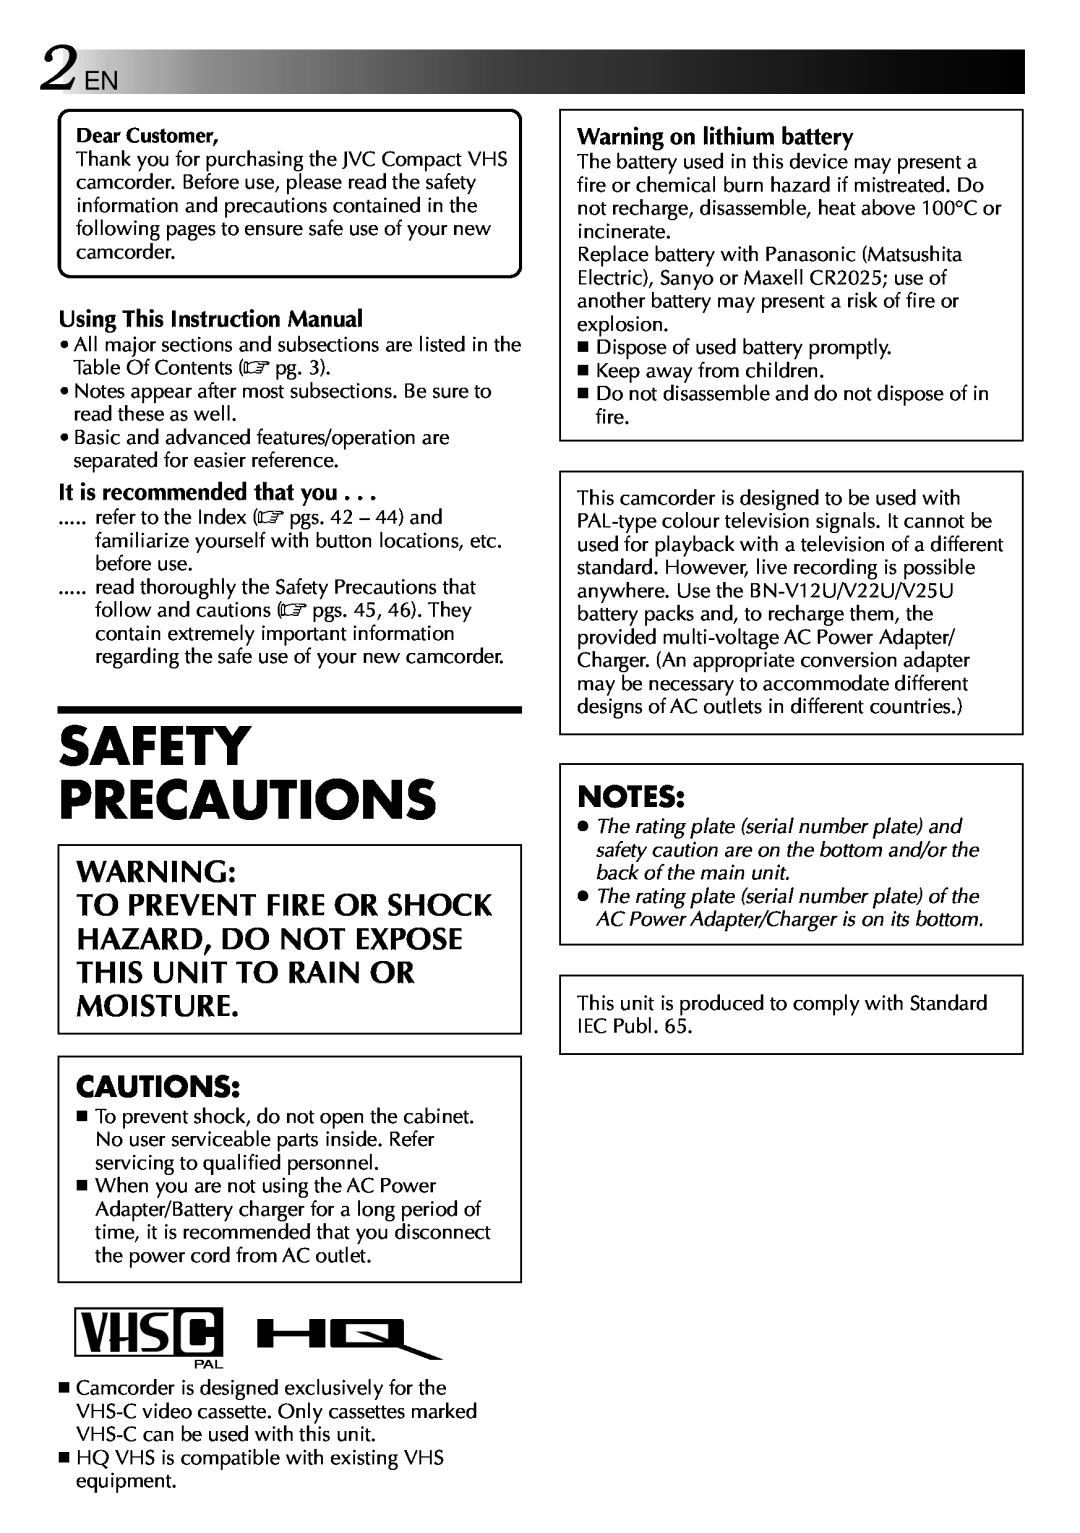 JVC LYT0002-082A Cautions, Safety Precautions, Using This Instruction Manual, It is recommended that you, Dear Customer 